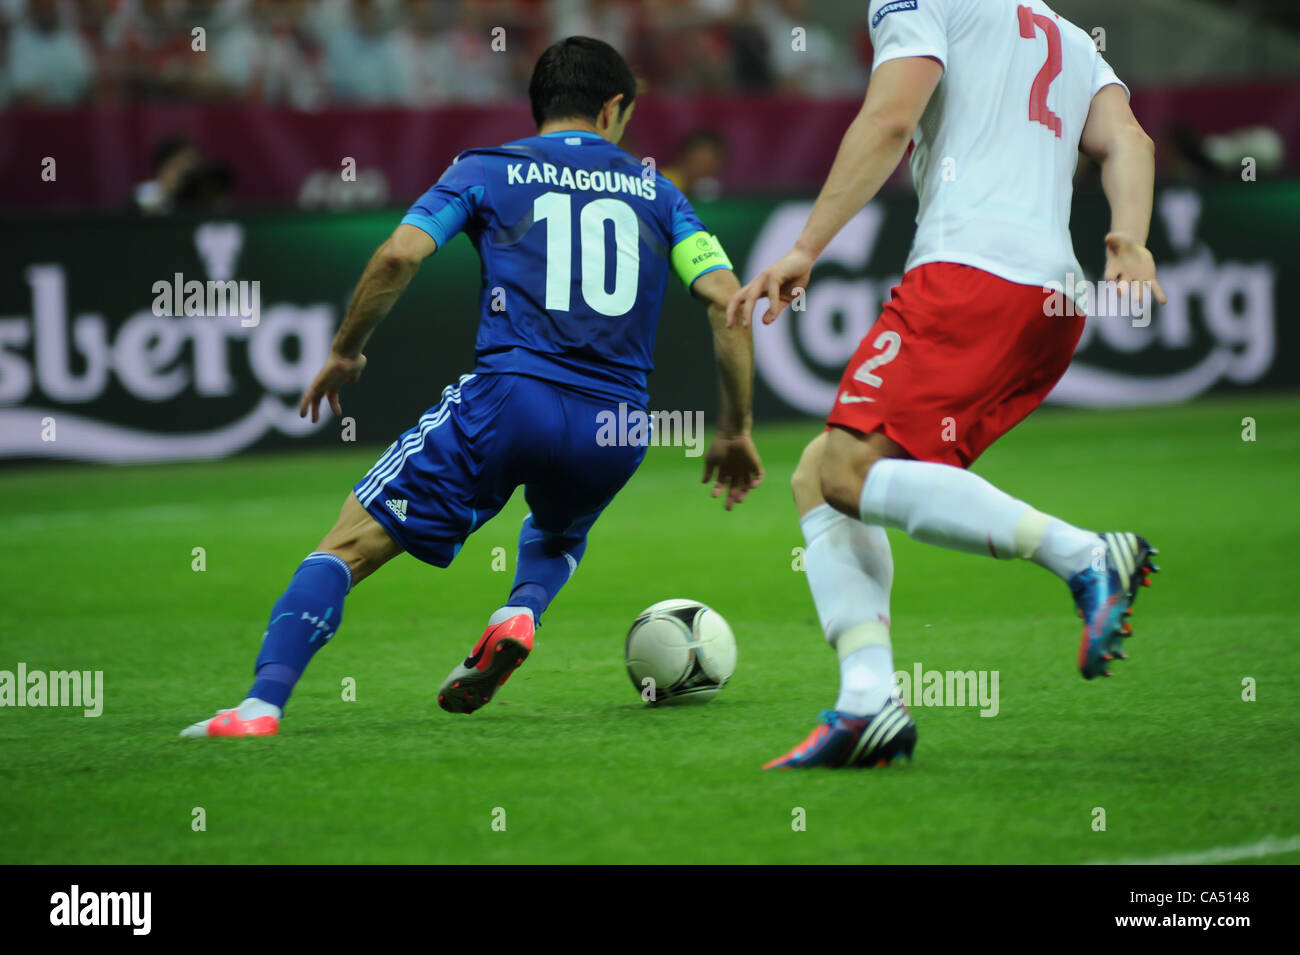 08.06.2012 Warsaw, Poland. Giorgos Karagounis (Panathinaikos FC) in action for Greece during the European Championship Group A game between Poland and Greece from the National Stadium. Stock Photo